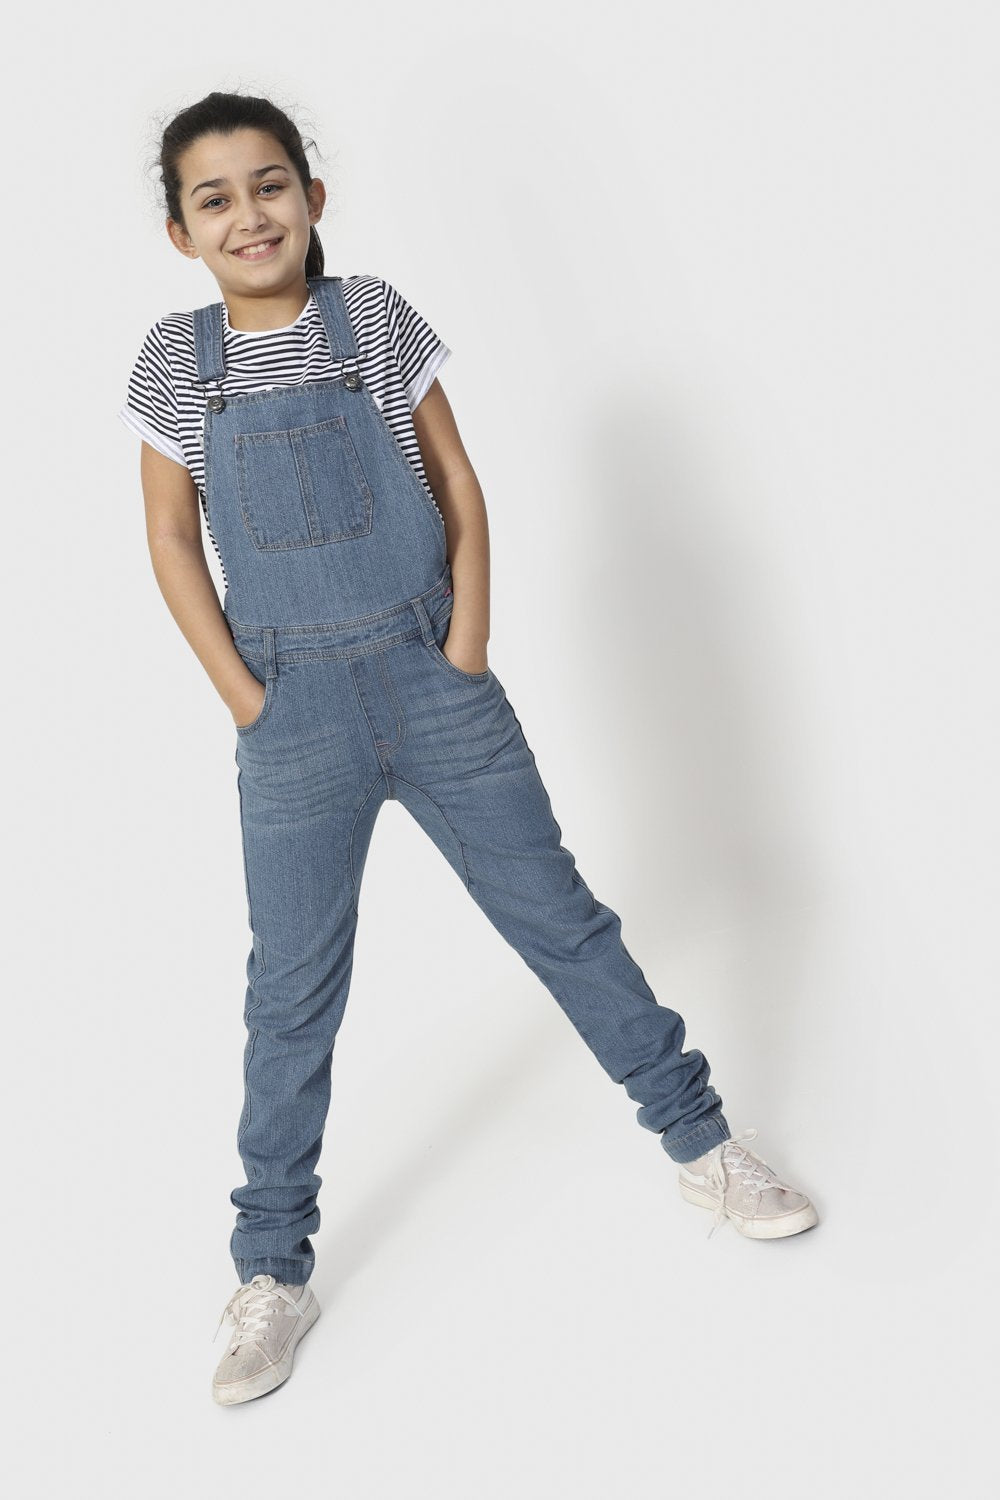 Full-length front pose with legs apart and hands in front pockets wearing Libby-style palewash dungarees with large bib pocket.